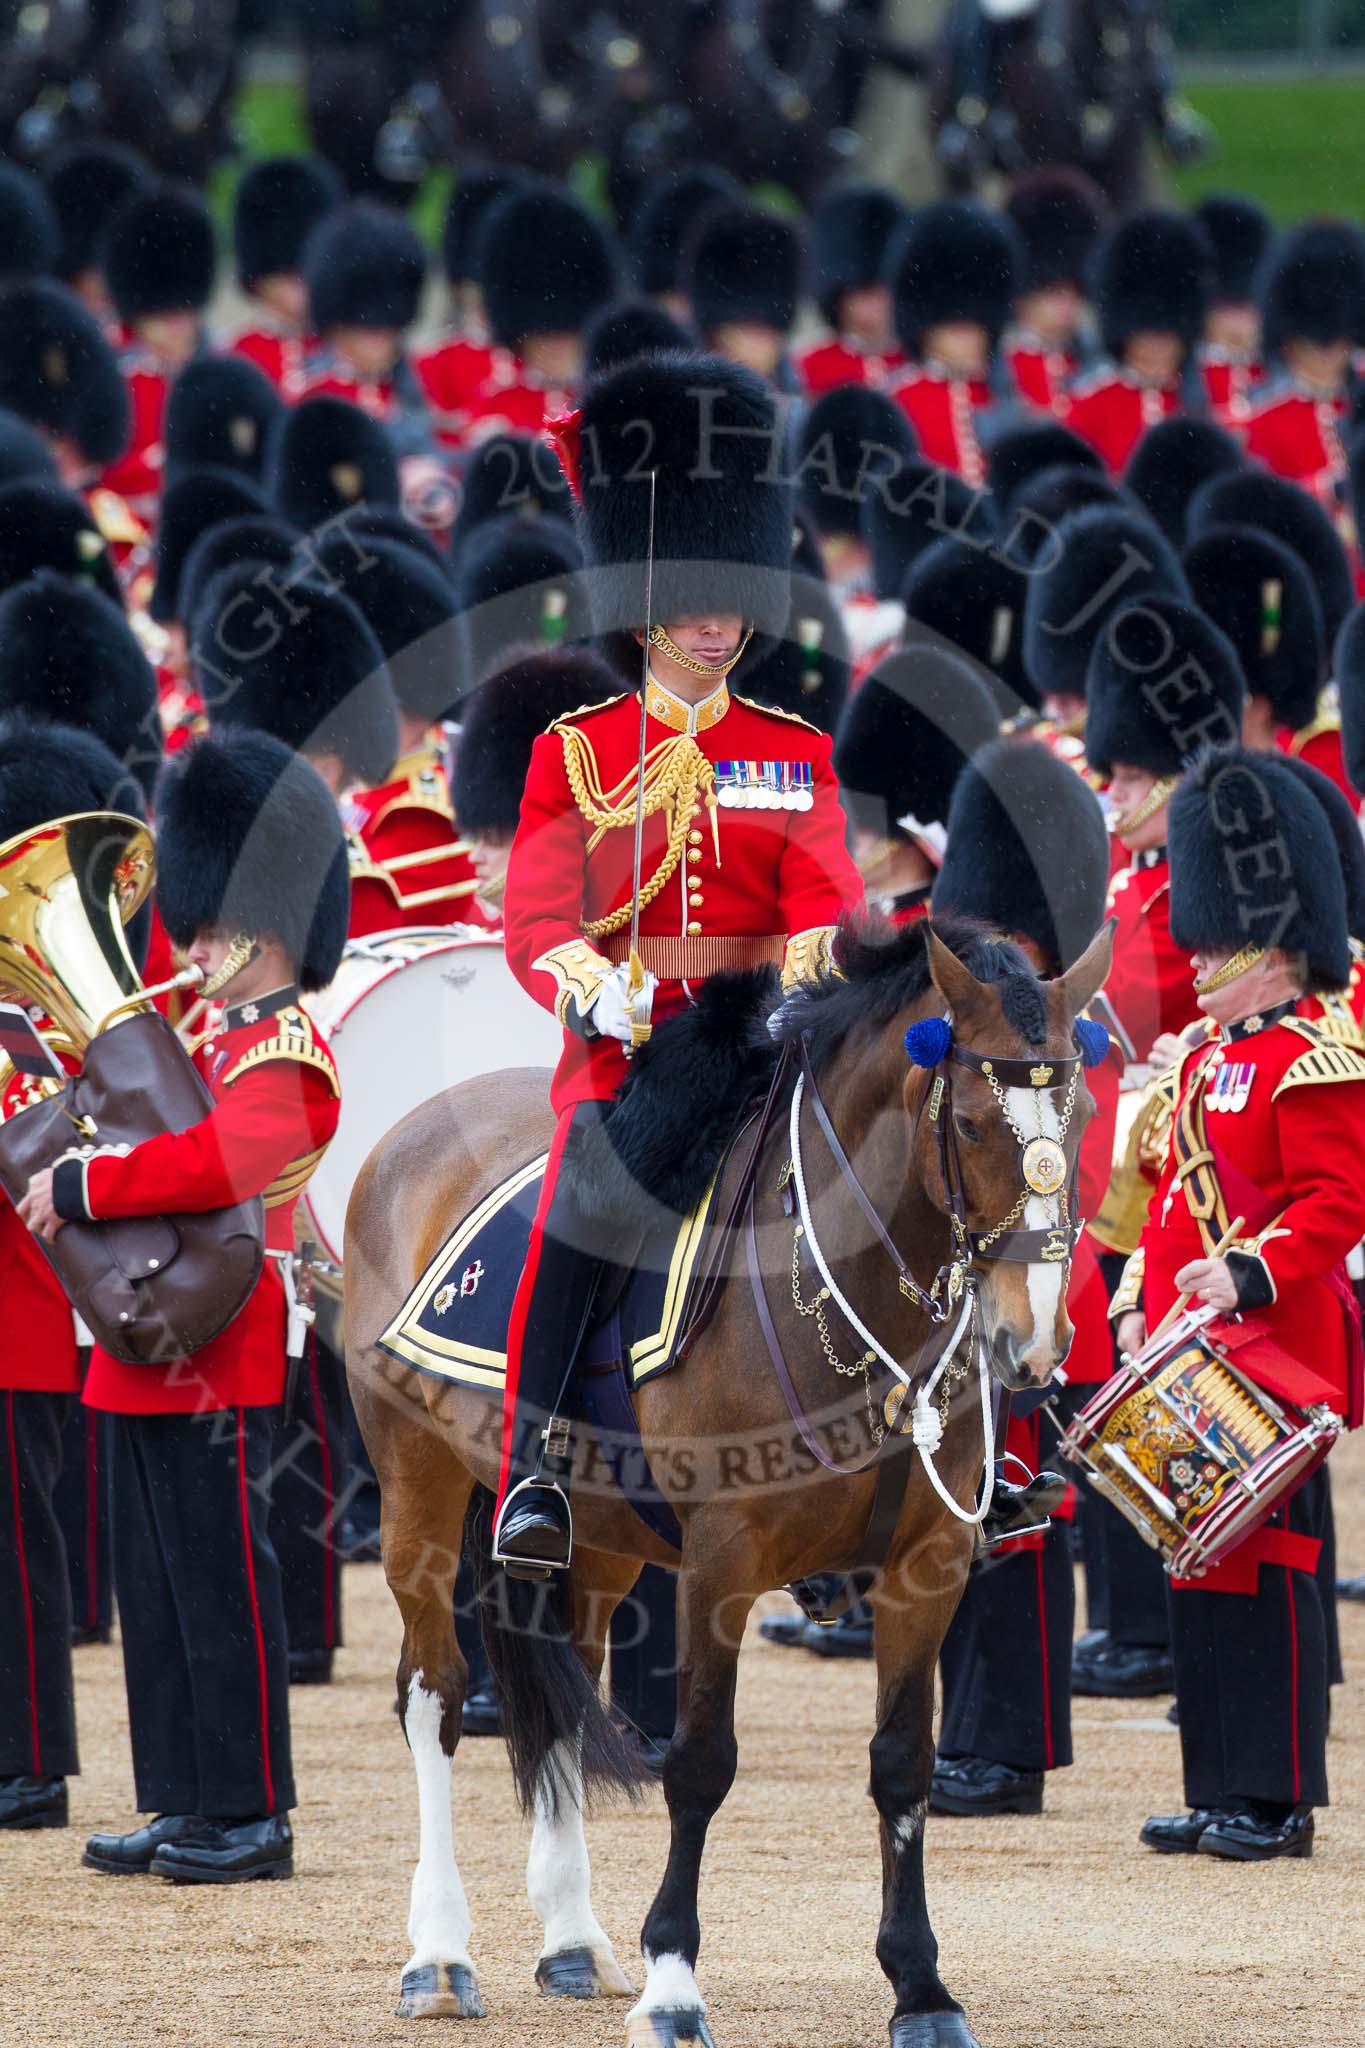 Trooping the Colour 2012: The Field Officer in Brigade Waiting, Lieutenant Colonel R C N Sergeant, Coldstream Guards, about to order "Present Arms" whilst the Massed Bands are playing the National Anthem..
Horse Guards Parade, Westminster,
London SW1,

United Kingdom,
on 16 June 2012 at 11:25, image #337